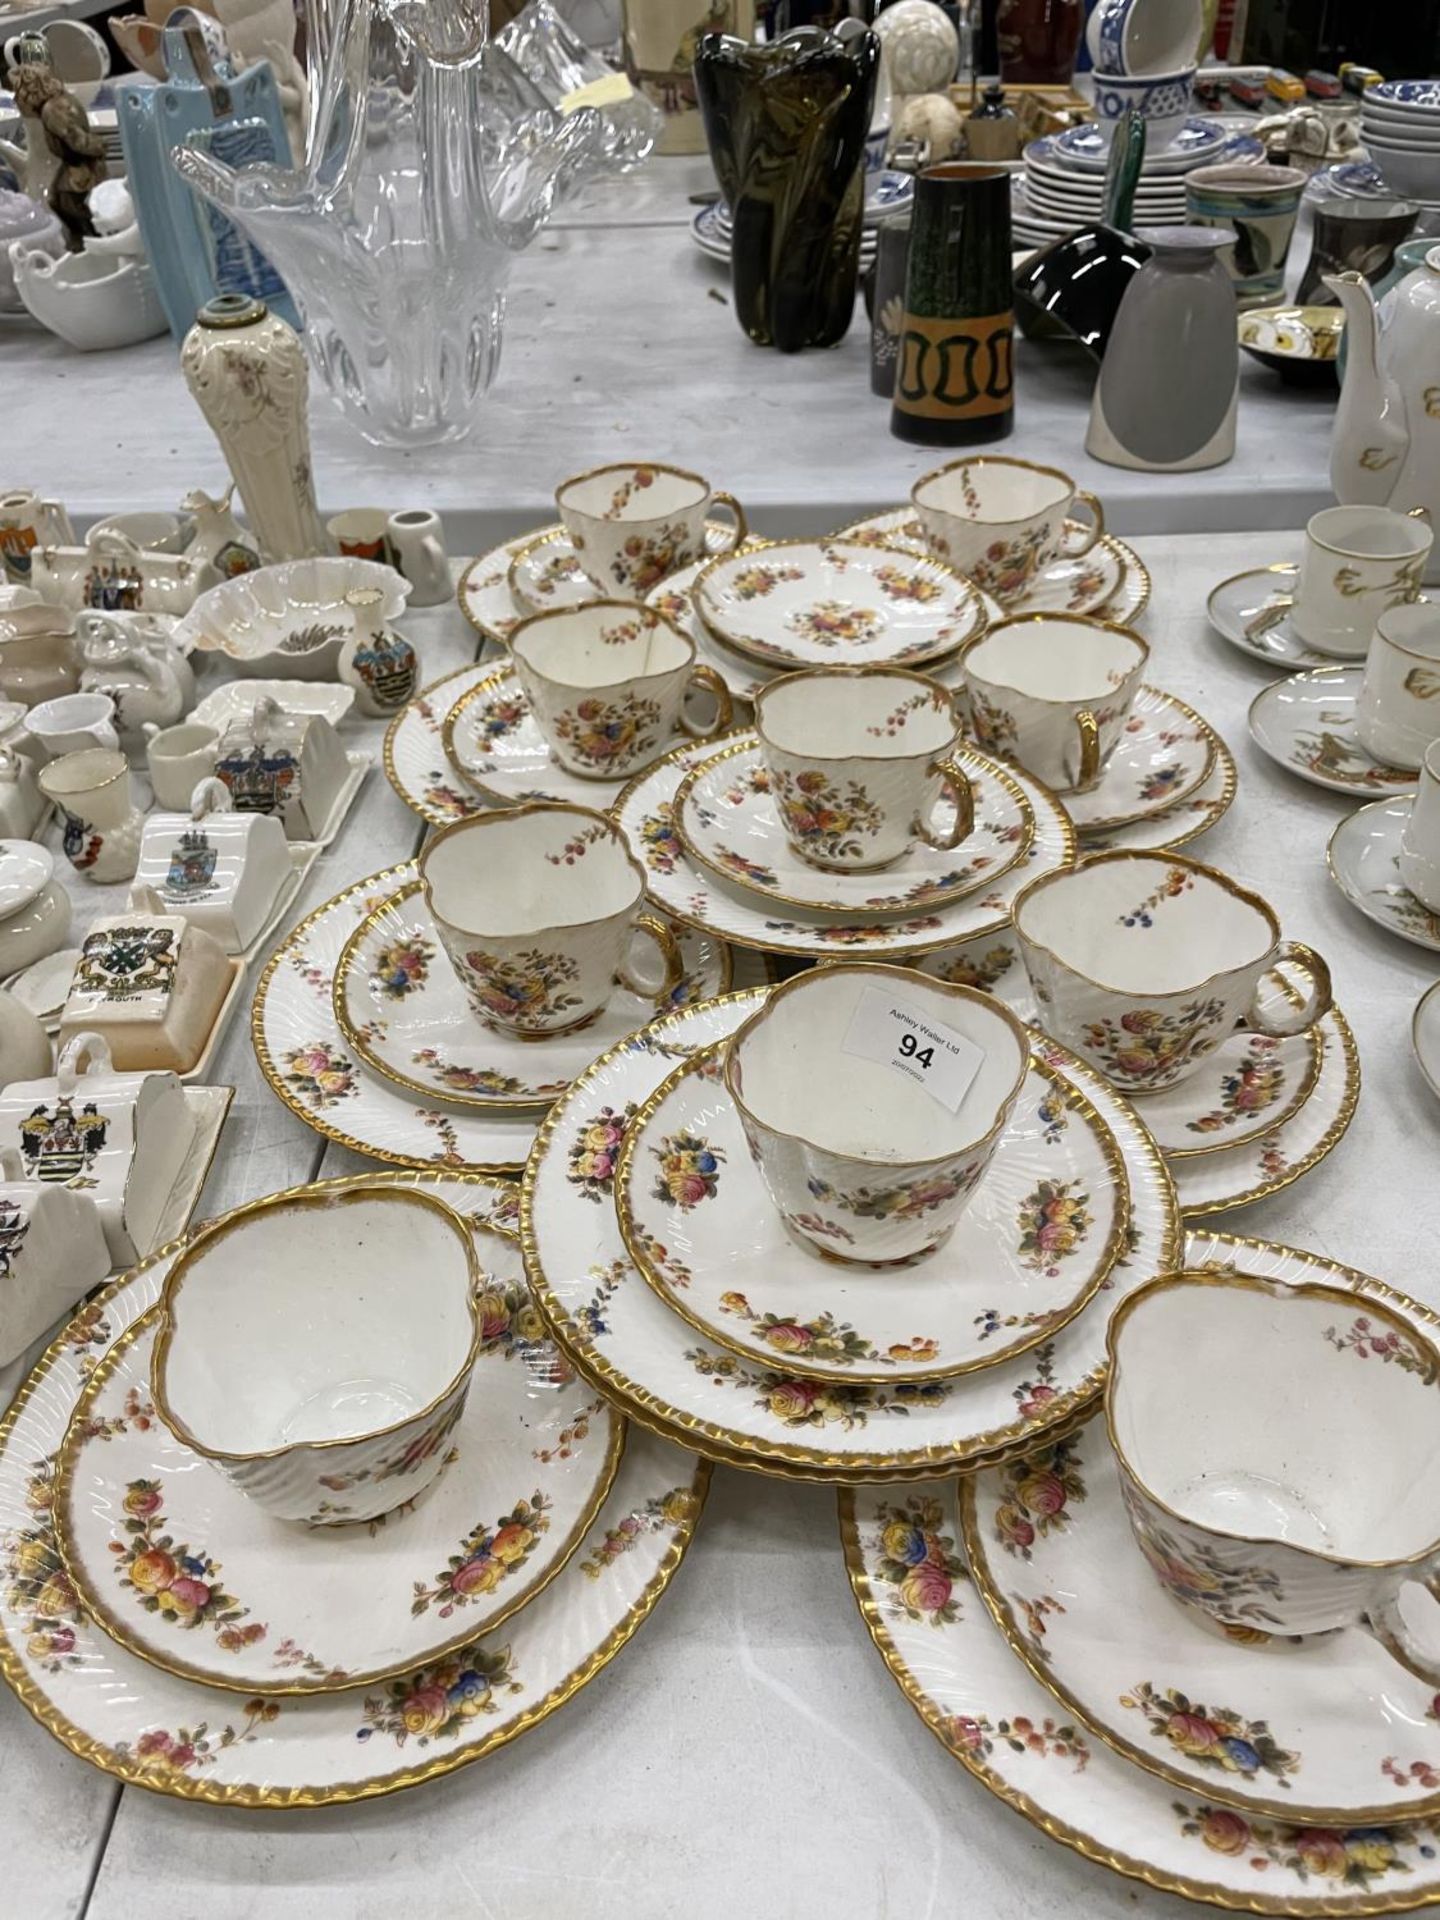 A COLLECTION OF CIRCA LATE 1800'S/EARLY 19TH CENTURY CHINA CUPS, SAUCERS AND PLATES DECORATED WITH - Image 3 of 6